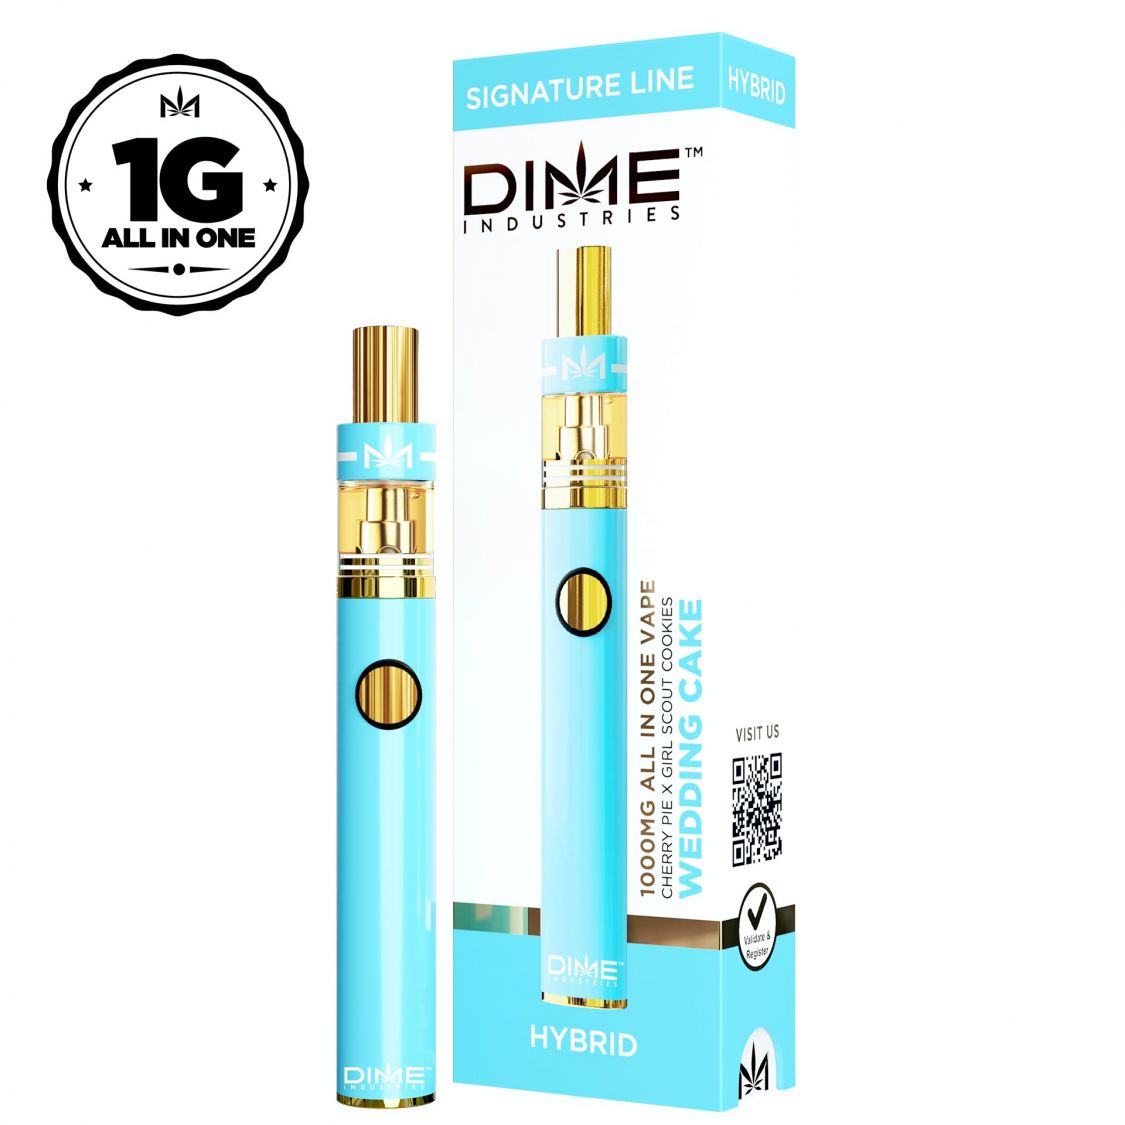 DIME Industries Wedding Cake All-In-One Disposable Vaporizers Disposable